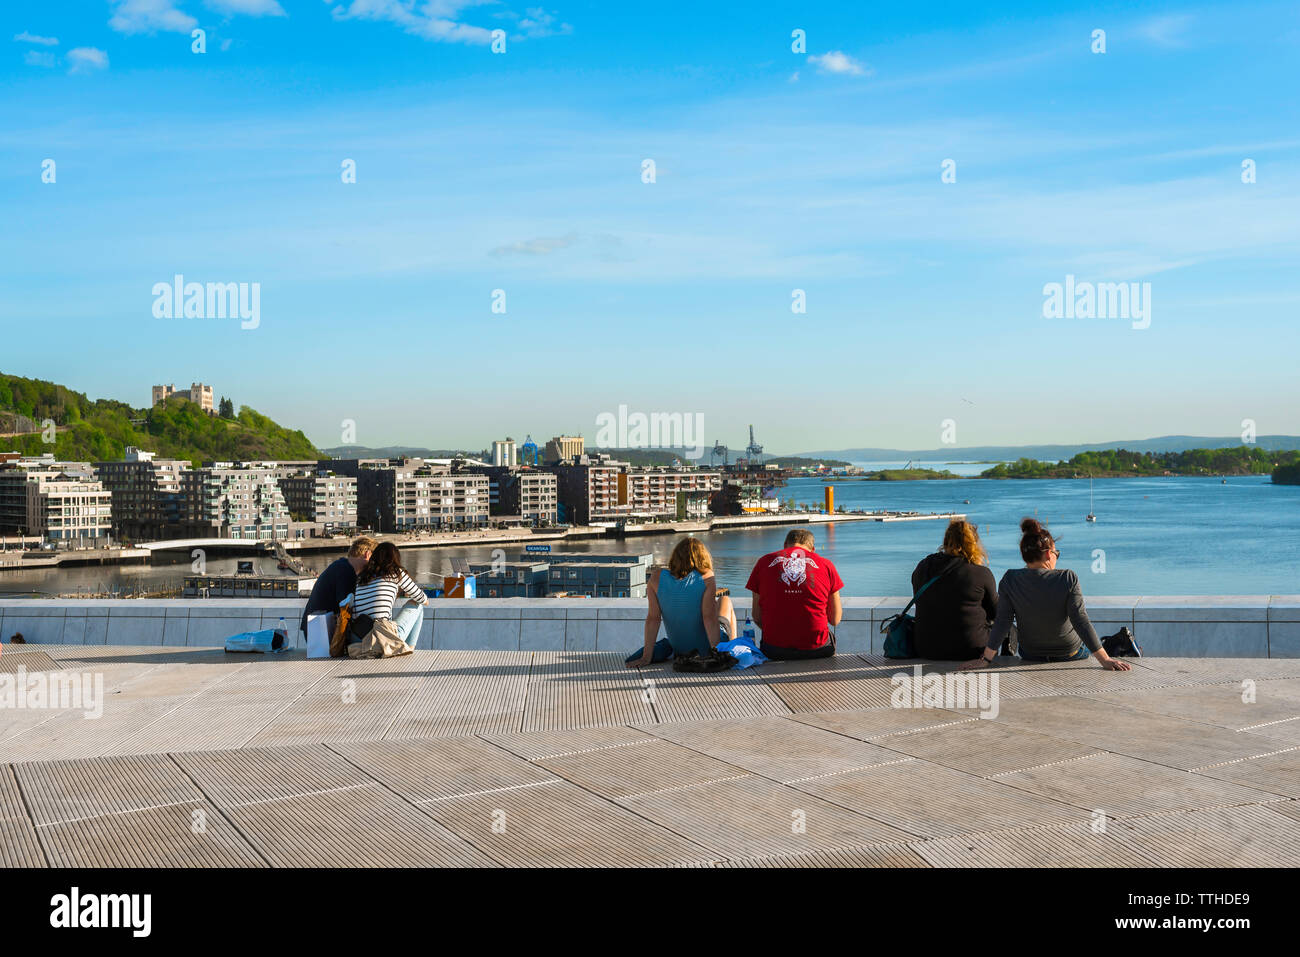 Oslofjord, rear view in summer of people sitting on the roof of the Oslo Opera House Building looking towards the Oslofjord harbor, Norway. Stock Photo